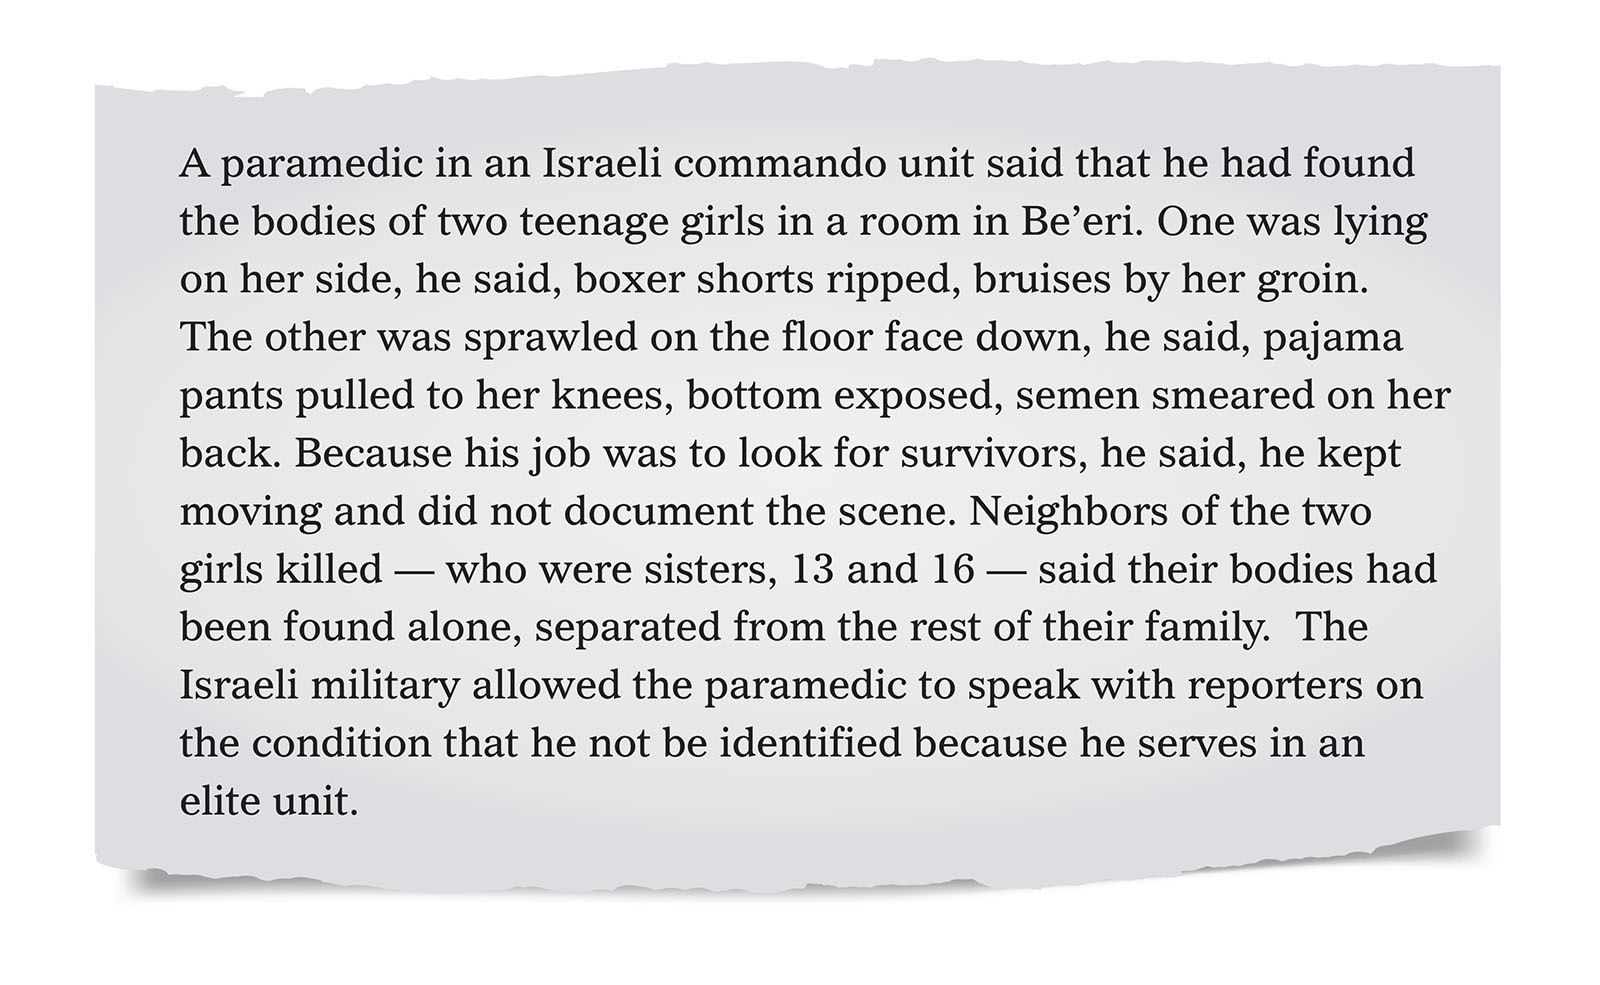 Pull quote:
A paramedic in an Israeli commando unit said that he had found the bodies of two teenage girls in a room in Be’eri.  One was lying on her side, he said, boxer shorts ripped, bruises by her groin. The other was sprawled on the floor face down, he said, pajama pants pulled to her knees, bottom exposed, semen smeared on her back. Because his job was to look for survivors, he said, he kept moving and did not document the scene. Neighbors of the two girls killed — who were sisters, 13 and 16 — said their bodies had been found alone, separated from the rest of their family.  The Israeli military allowed the paramedic to speak with reporters on the condition that he not be identified because he serves in an elite unit.